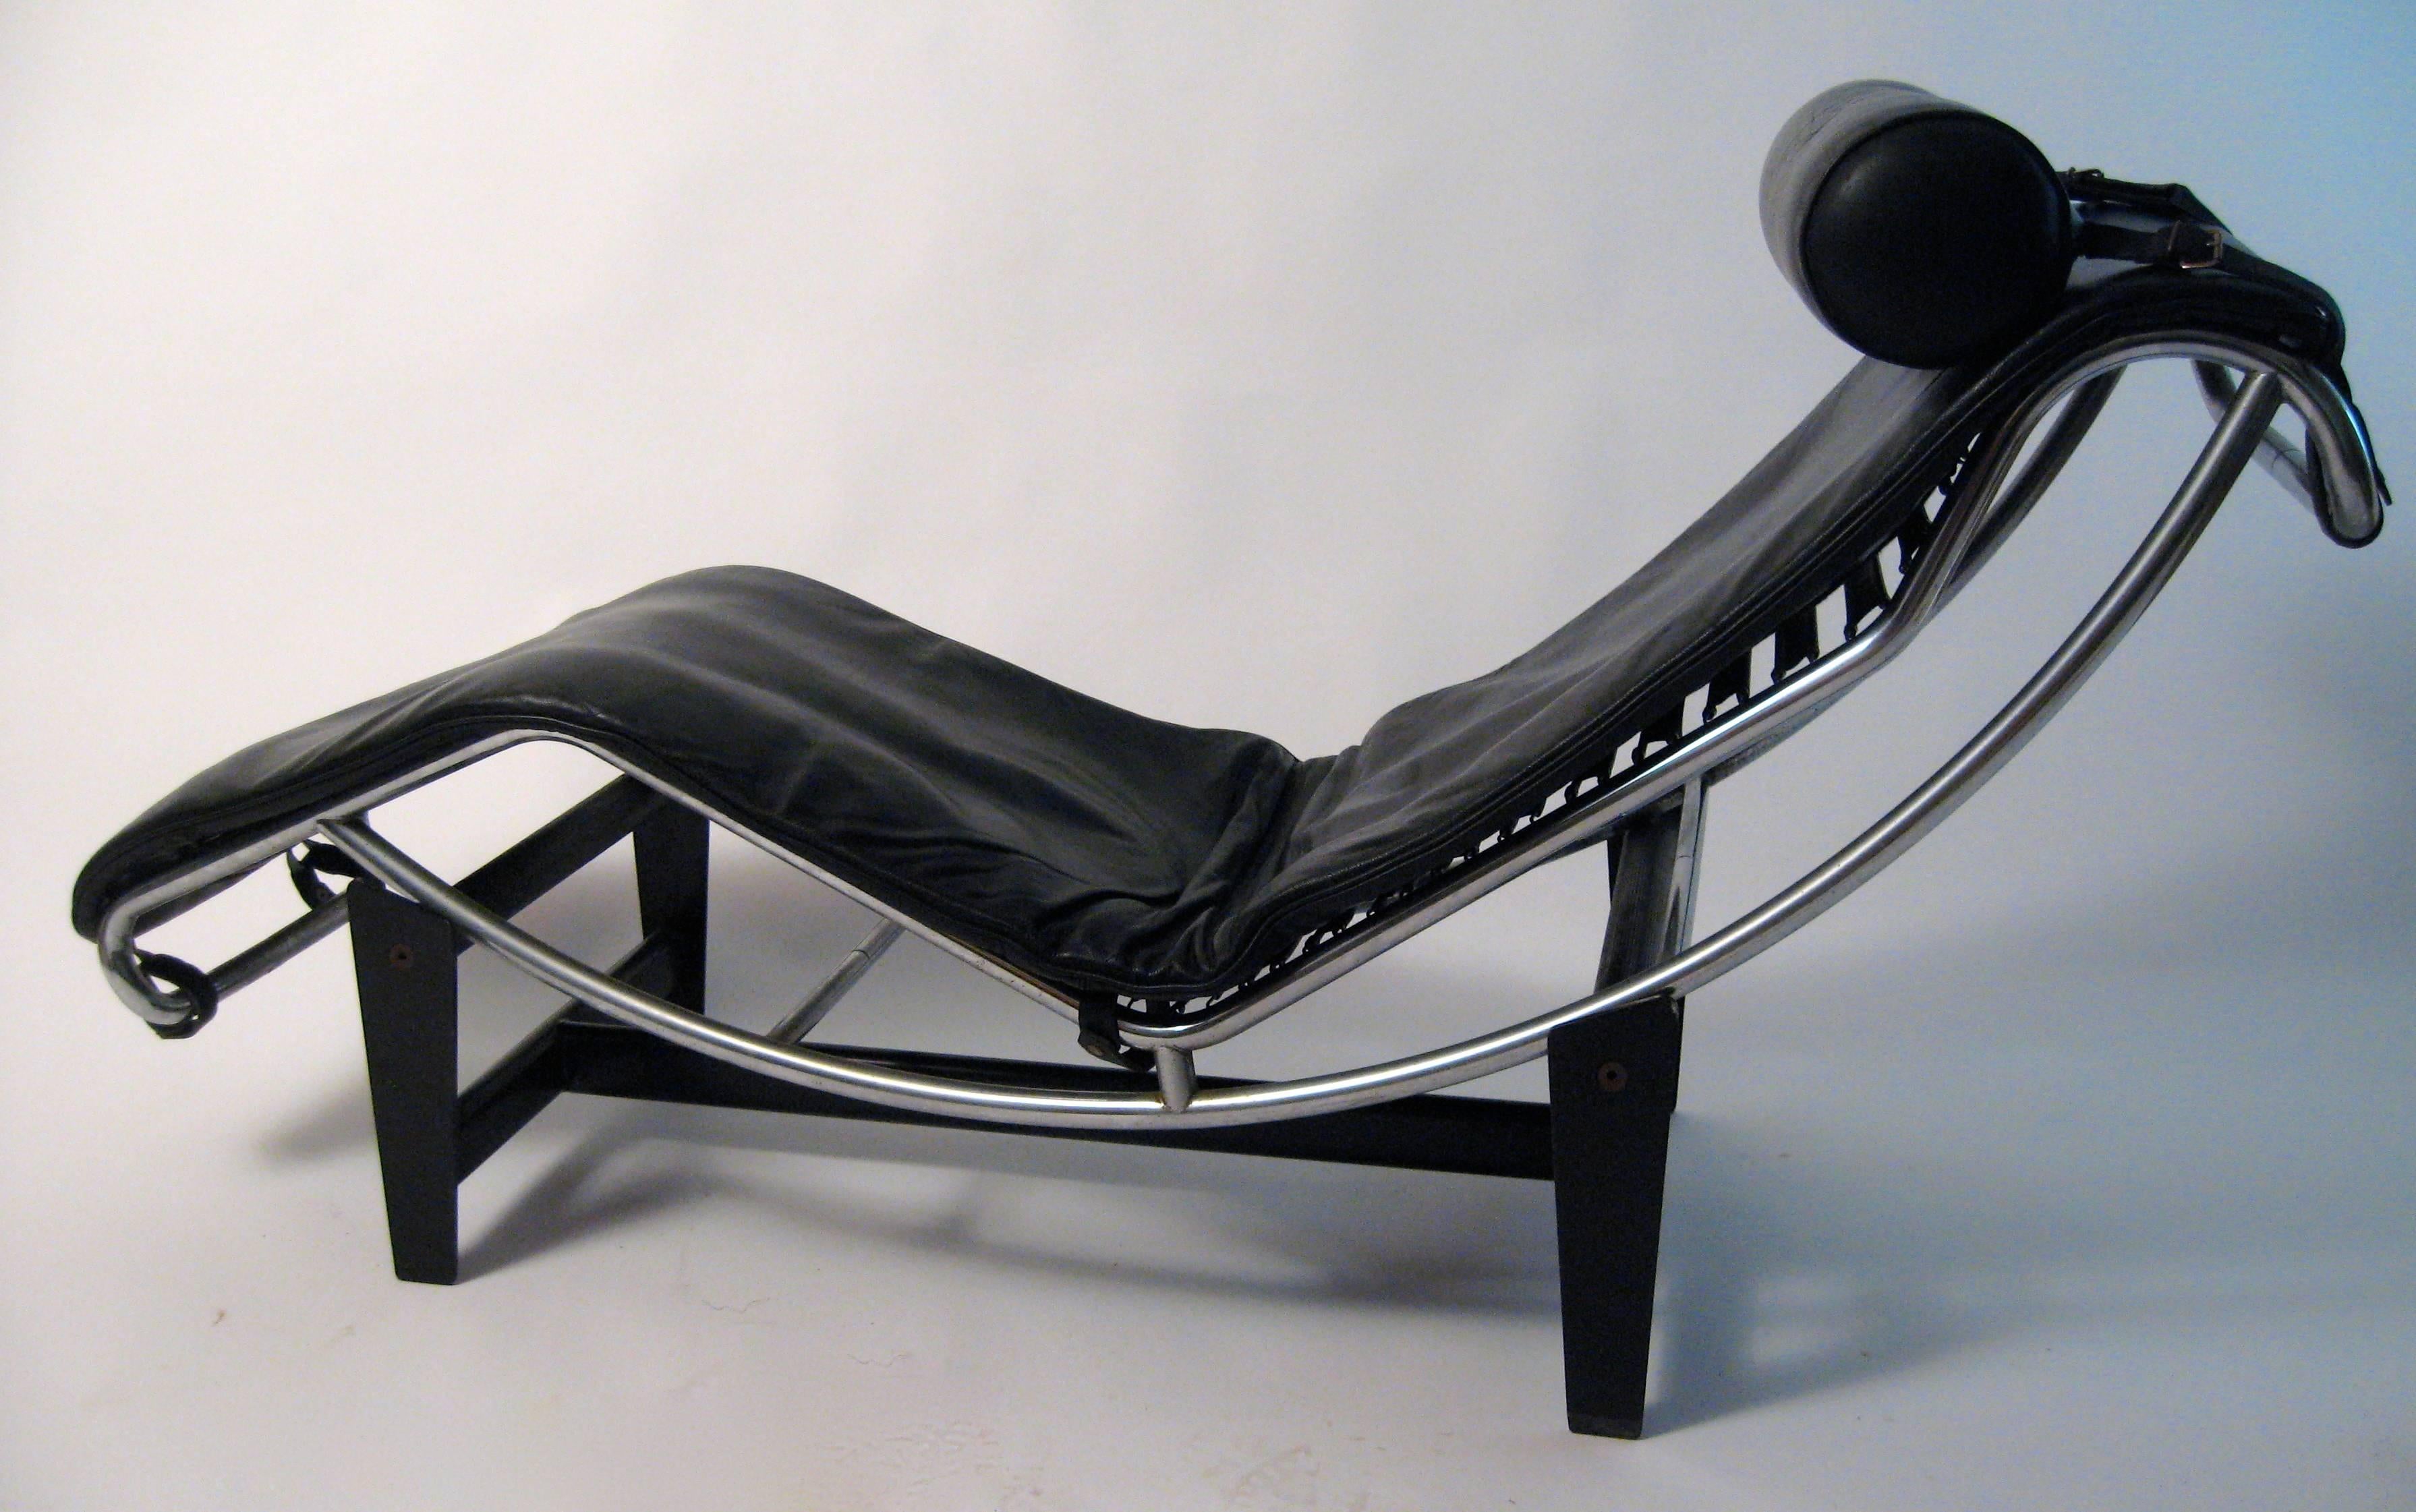 Collaborative design by the modern masters: Le Corbusier, Charlotte Perriand and Pierre Jeanneret. The chaise features supple black leather cushion and headrest, rubberized sling strapping, chrome finished frame, matte black steel base. Signed and